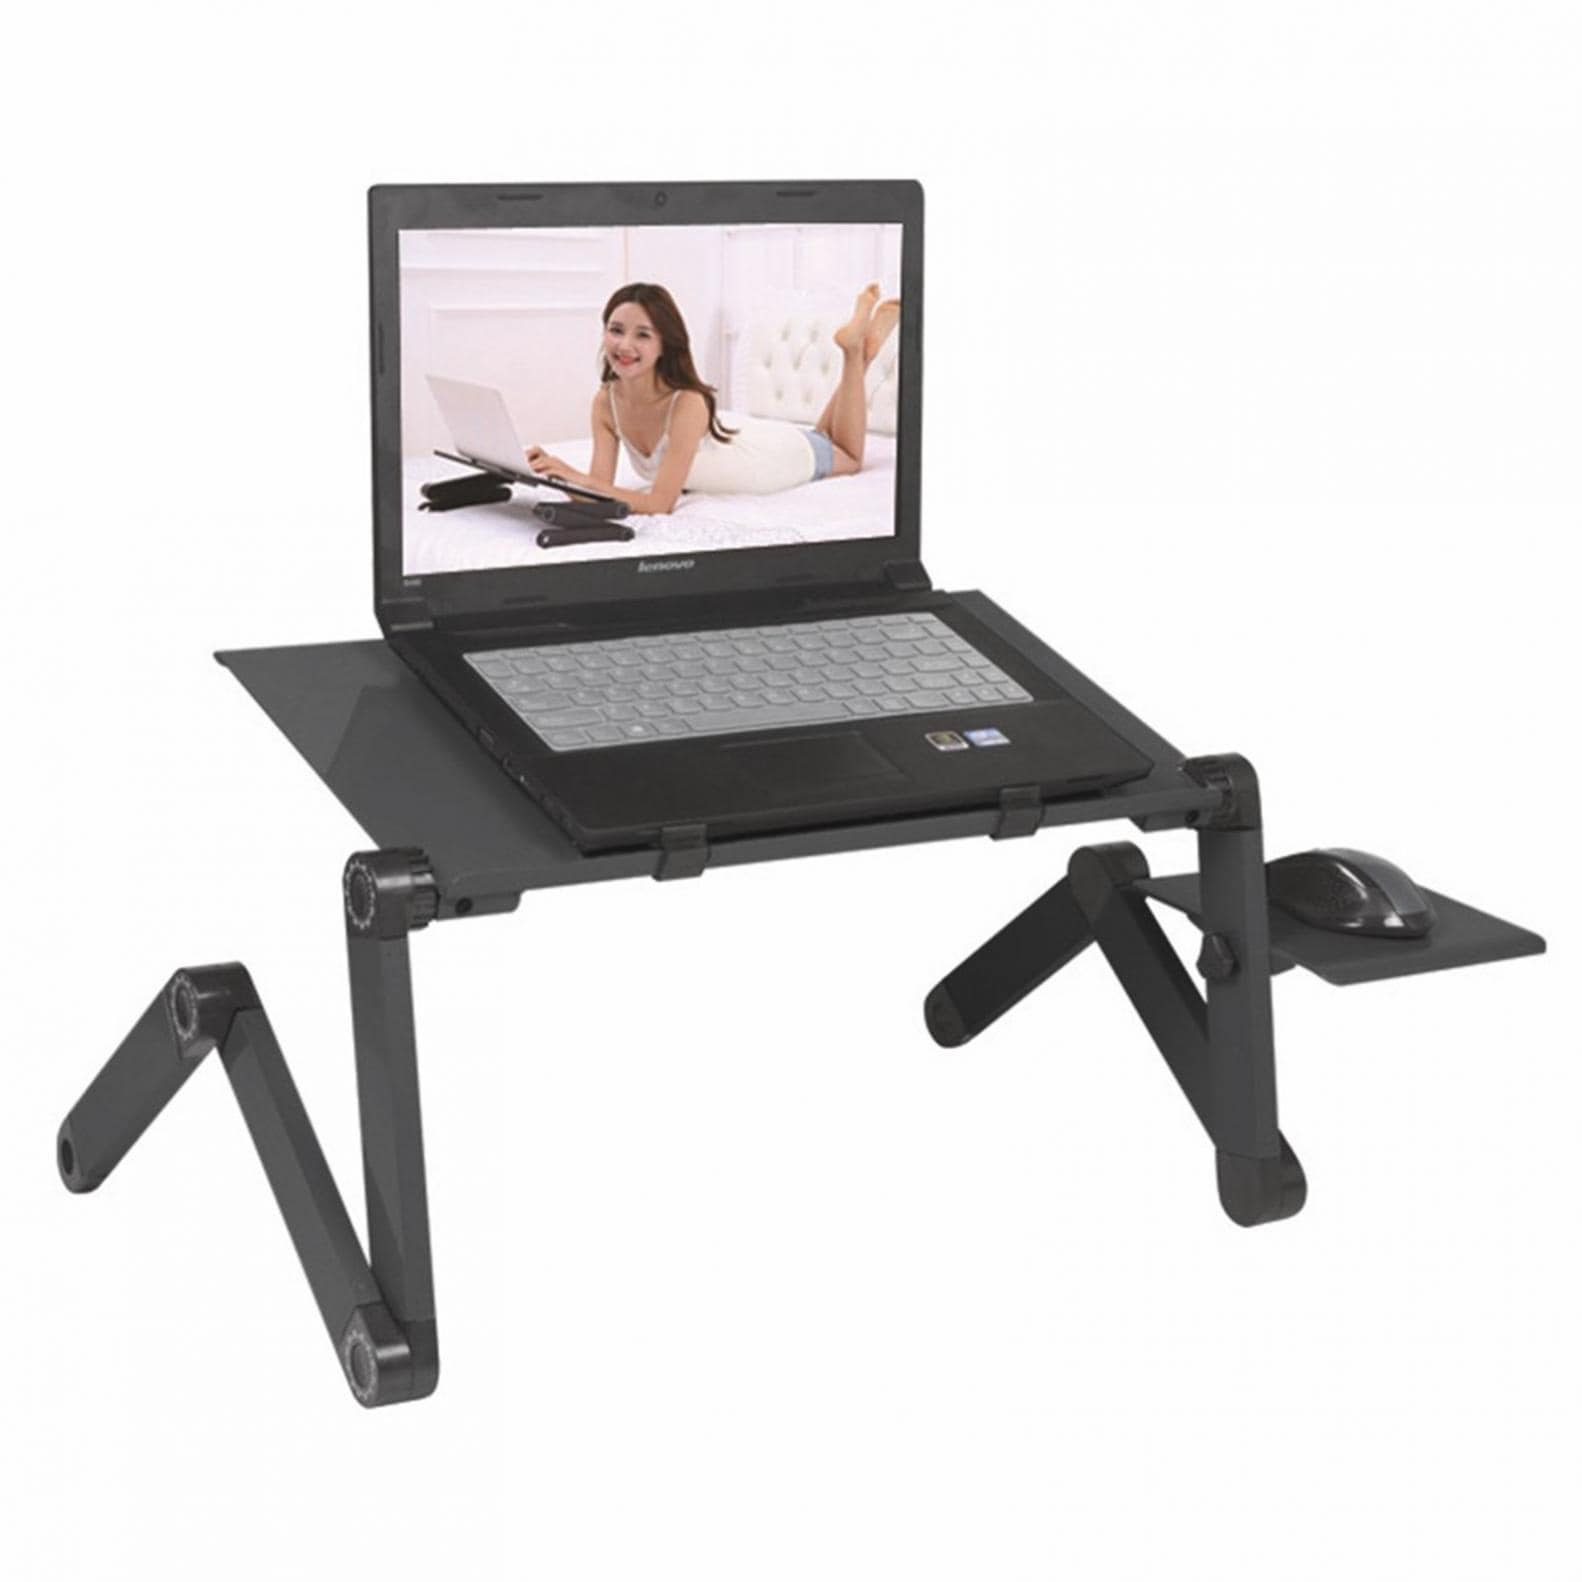 Adjustable Folding Laptop Computer Office Table Desk Stand Tray